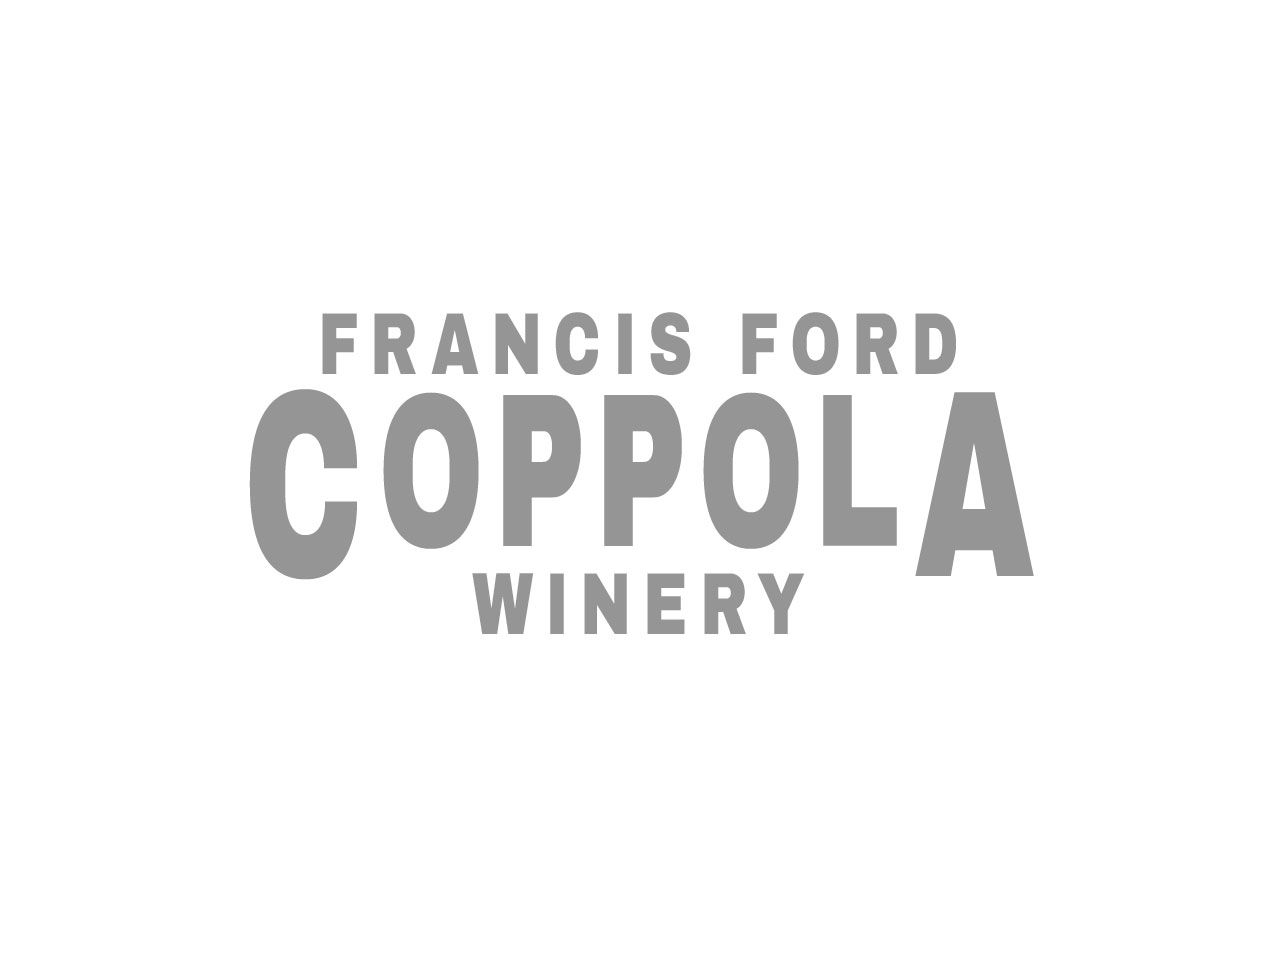 Francis Ford Coppola WInery